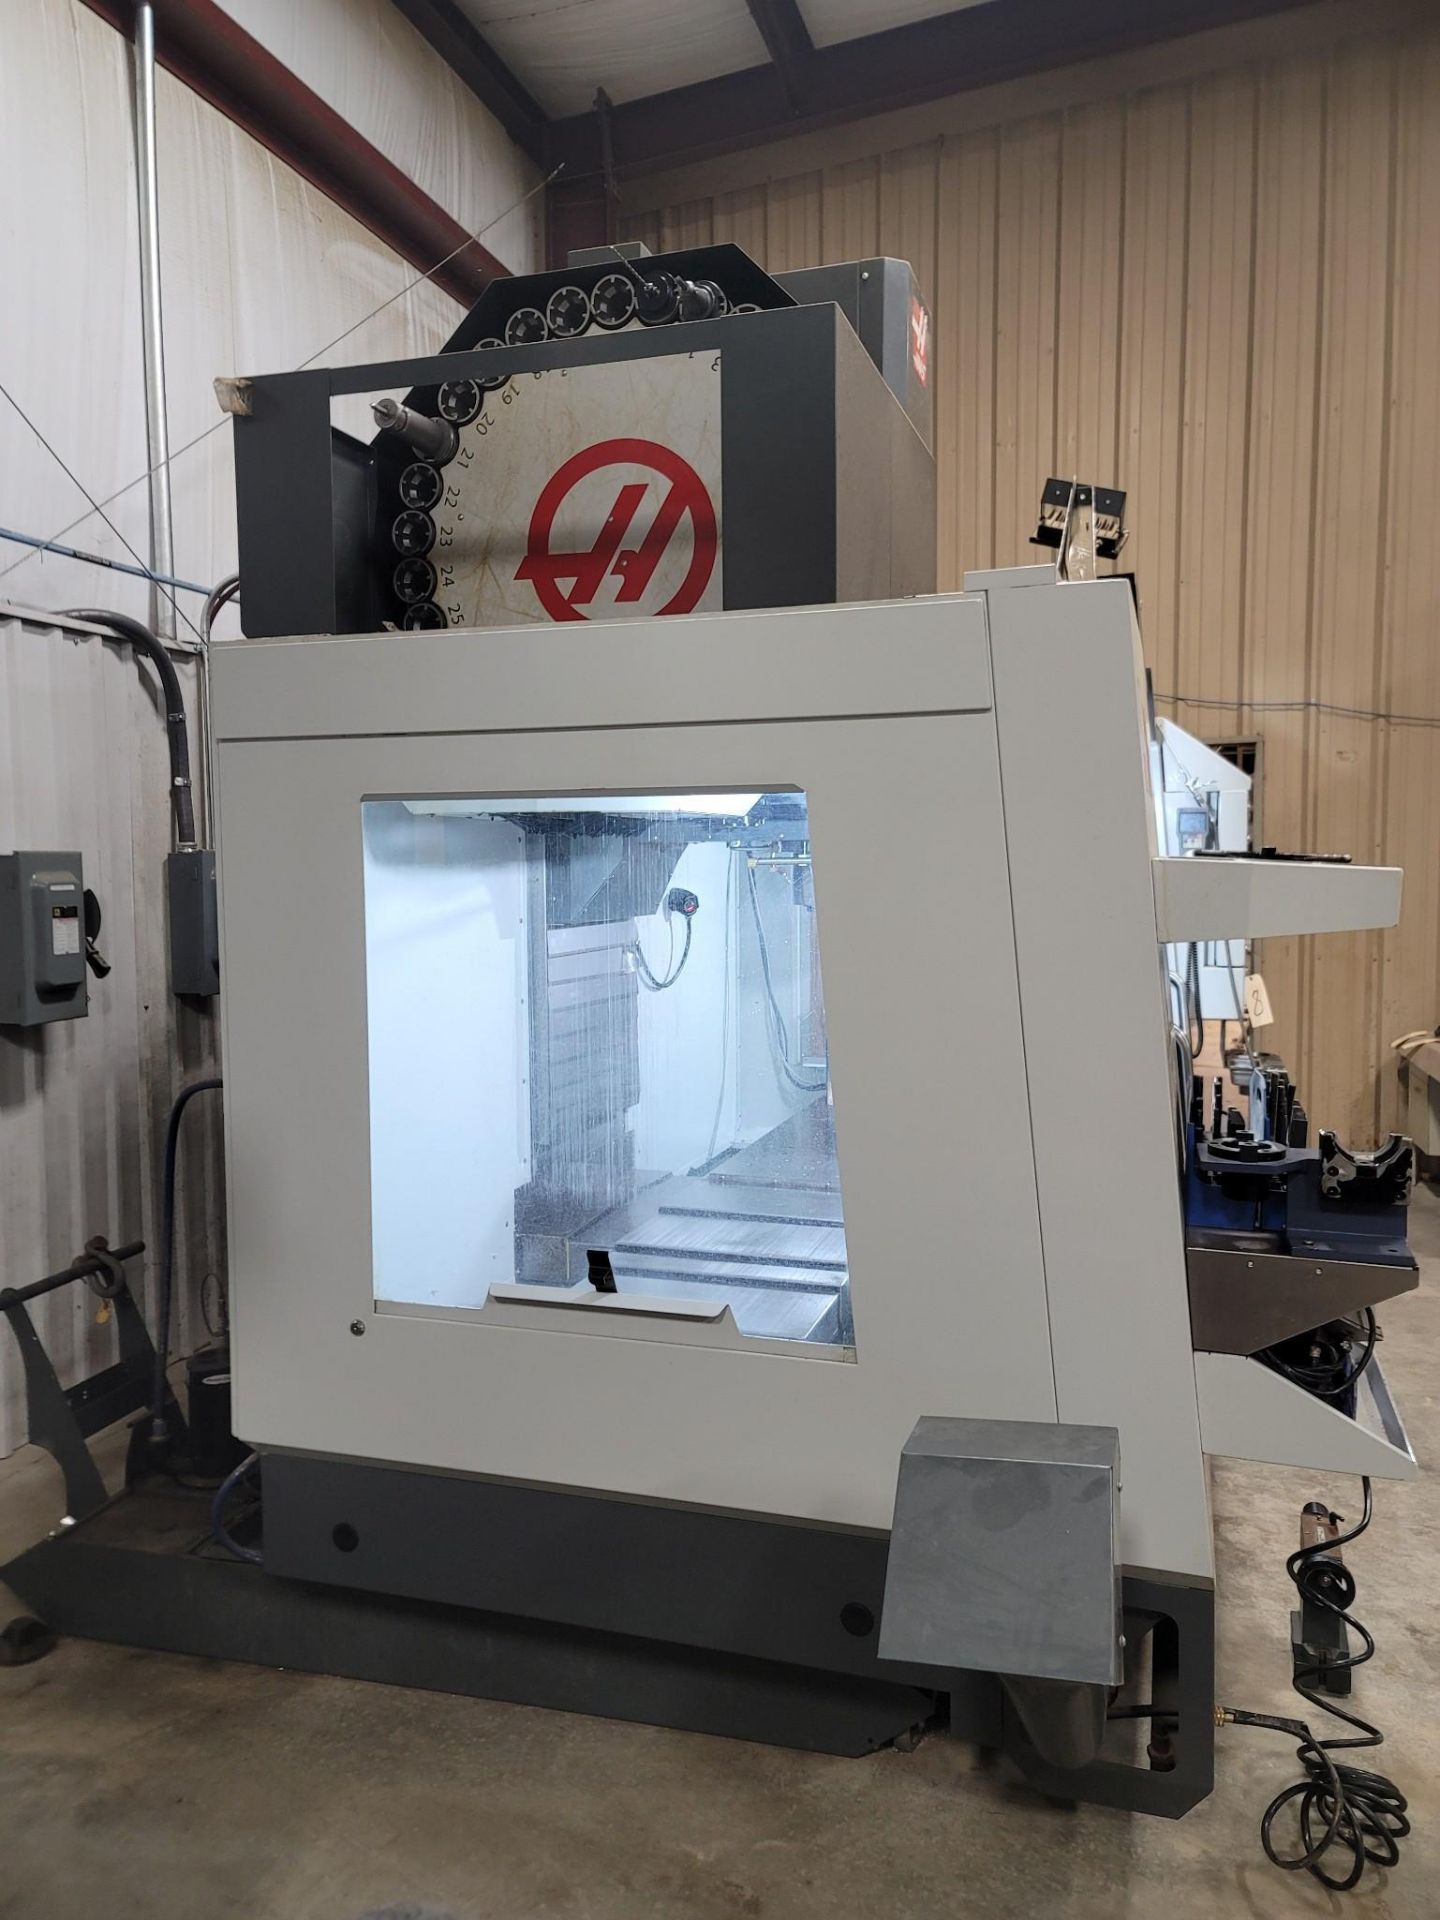 2019, Haas VF 3YT/ 50 Vertical Machining Center, VMC, S/N 1167708 - Image 14 of 42